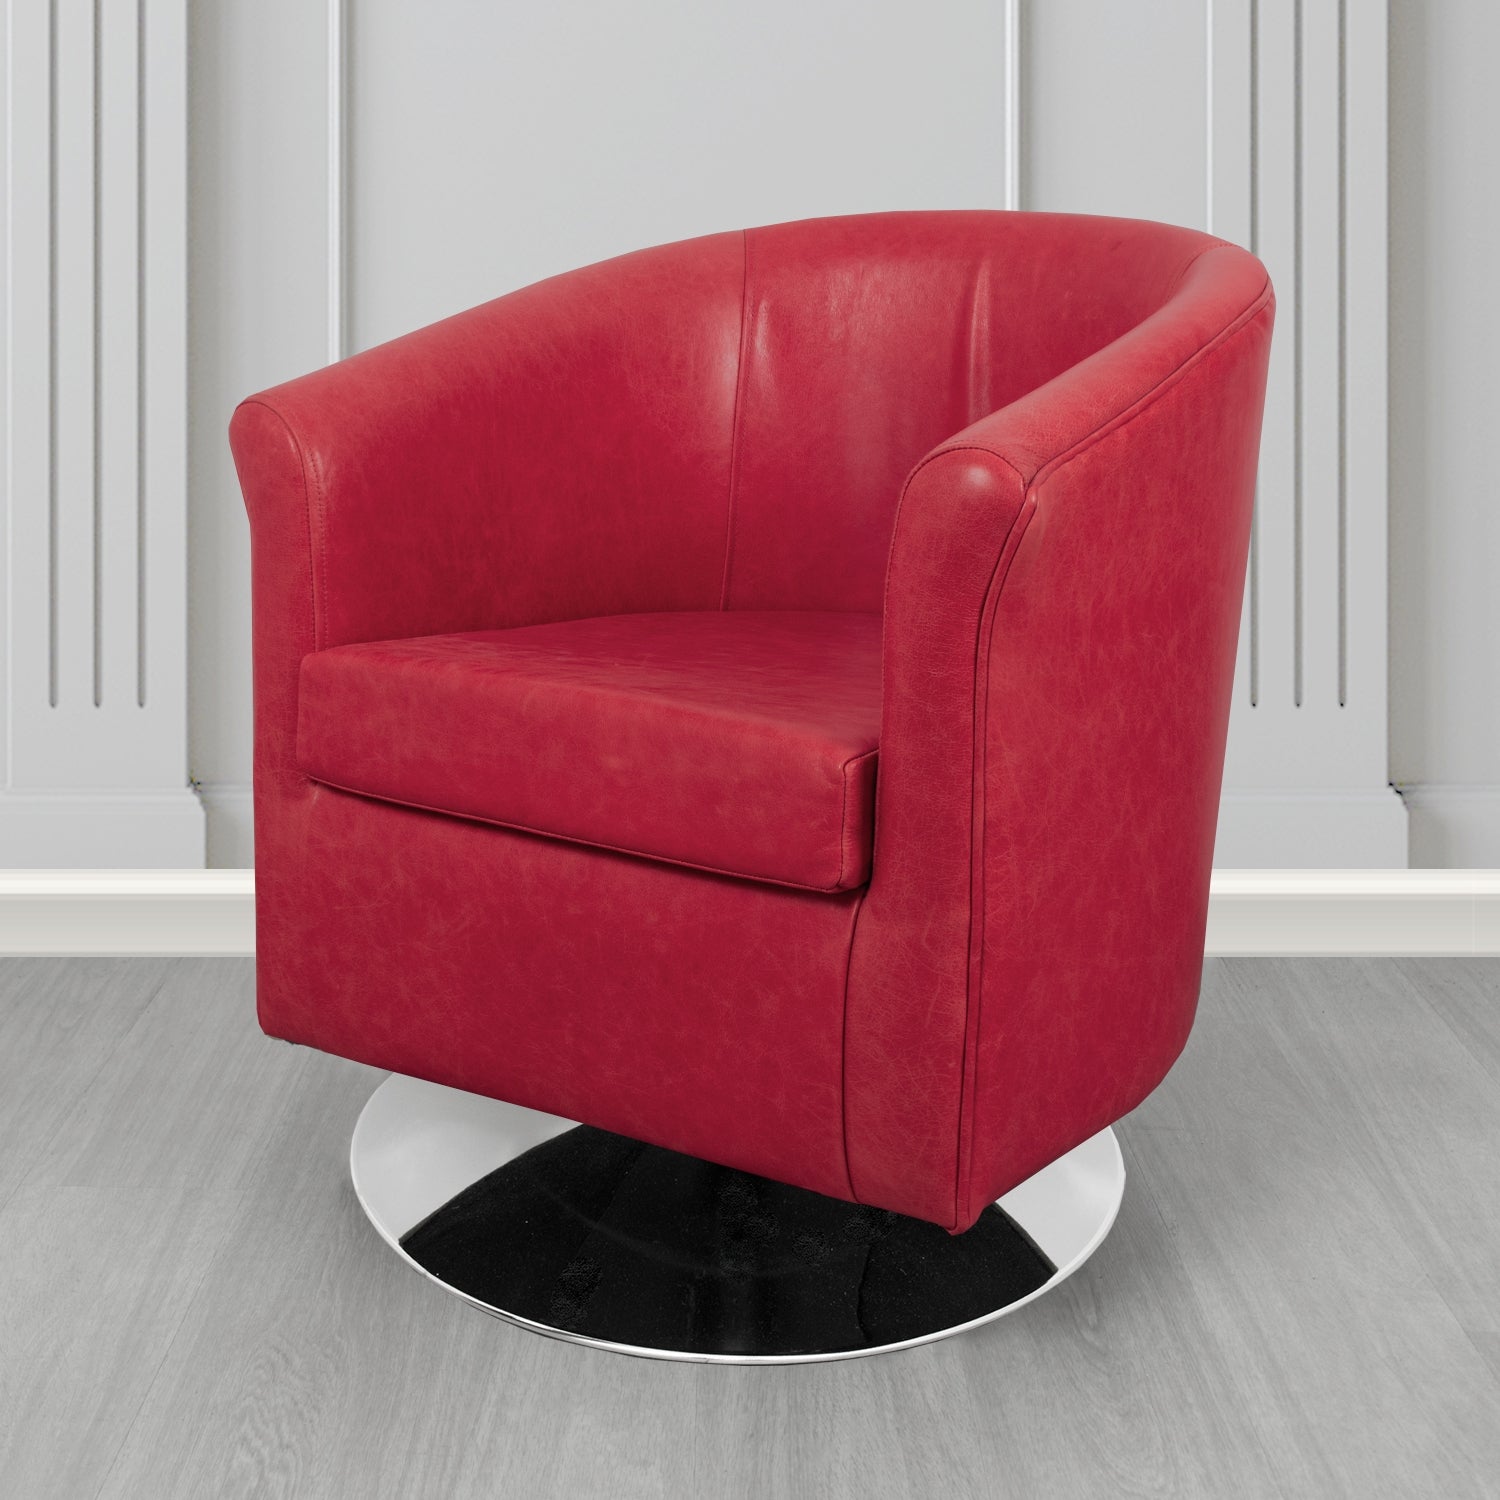 Tuscany Swivel Tub Chair in Crib 5 Old English Gamay Genuine Leather - The Tub Chair Shop